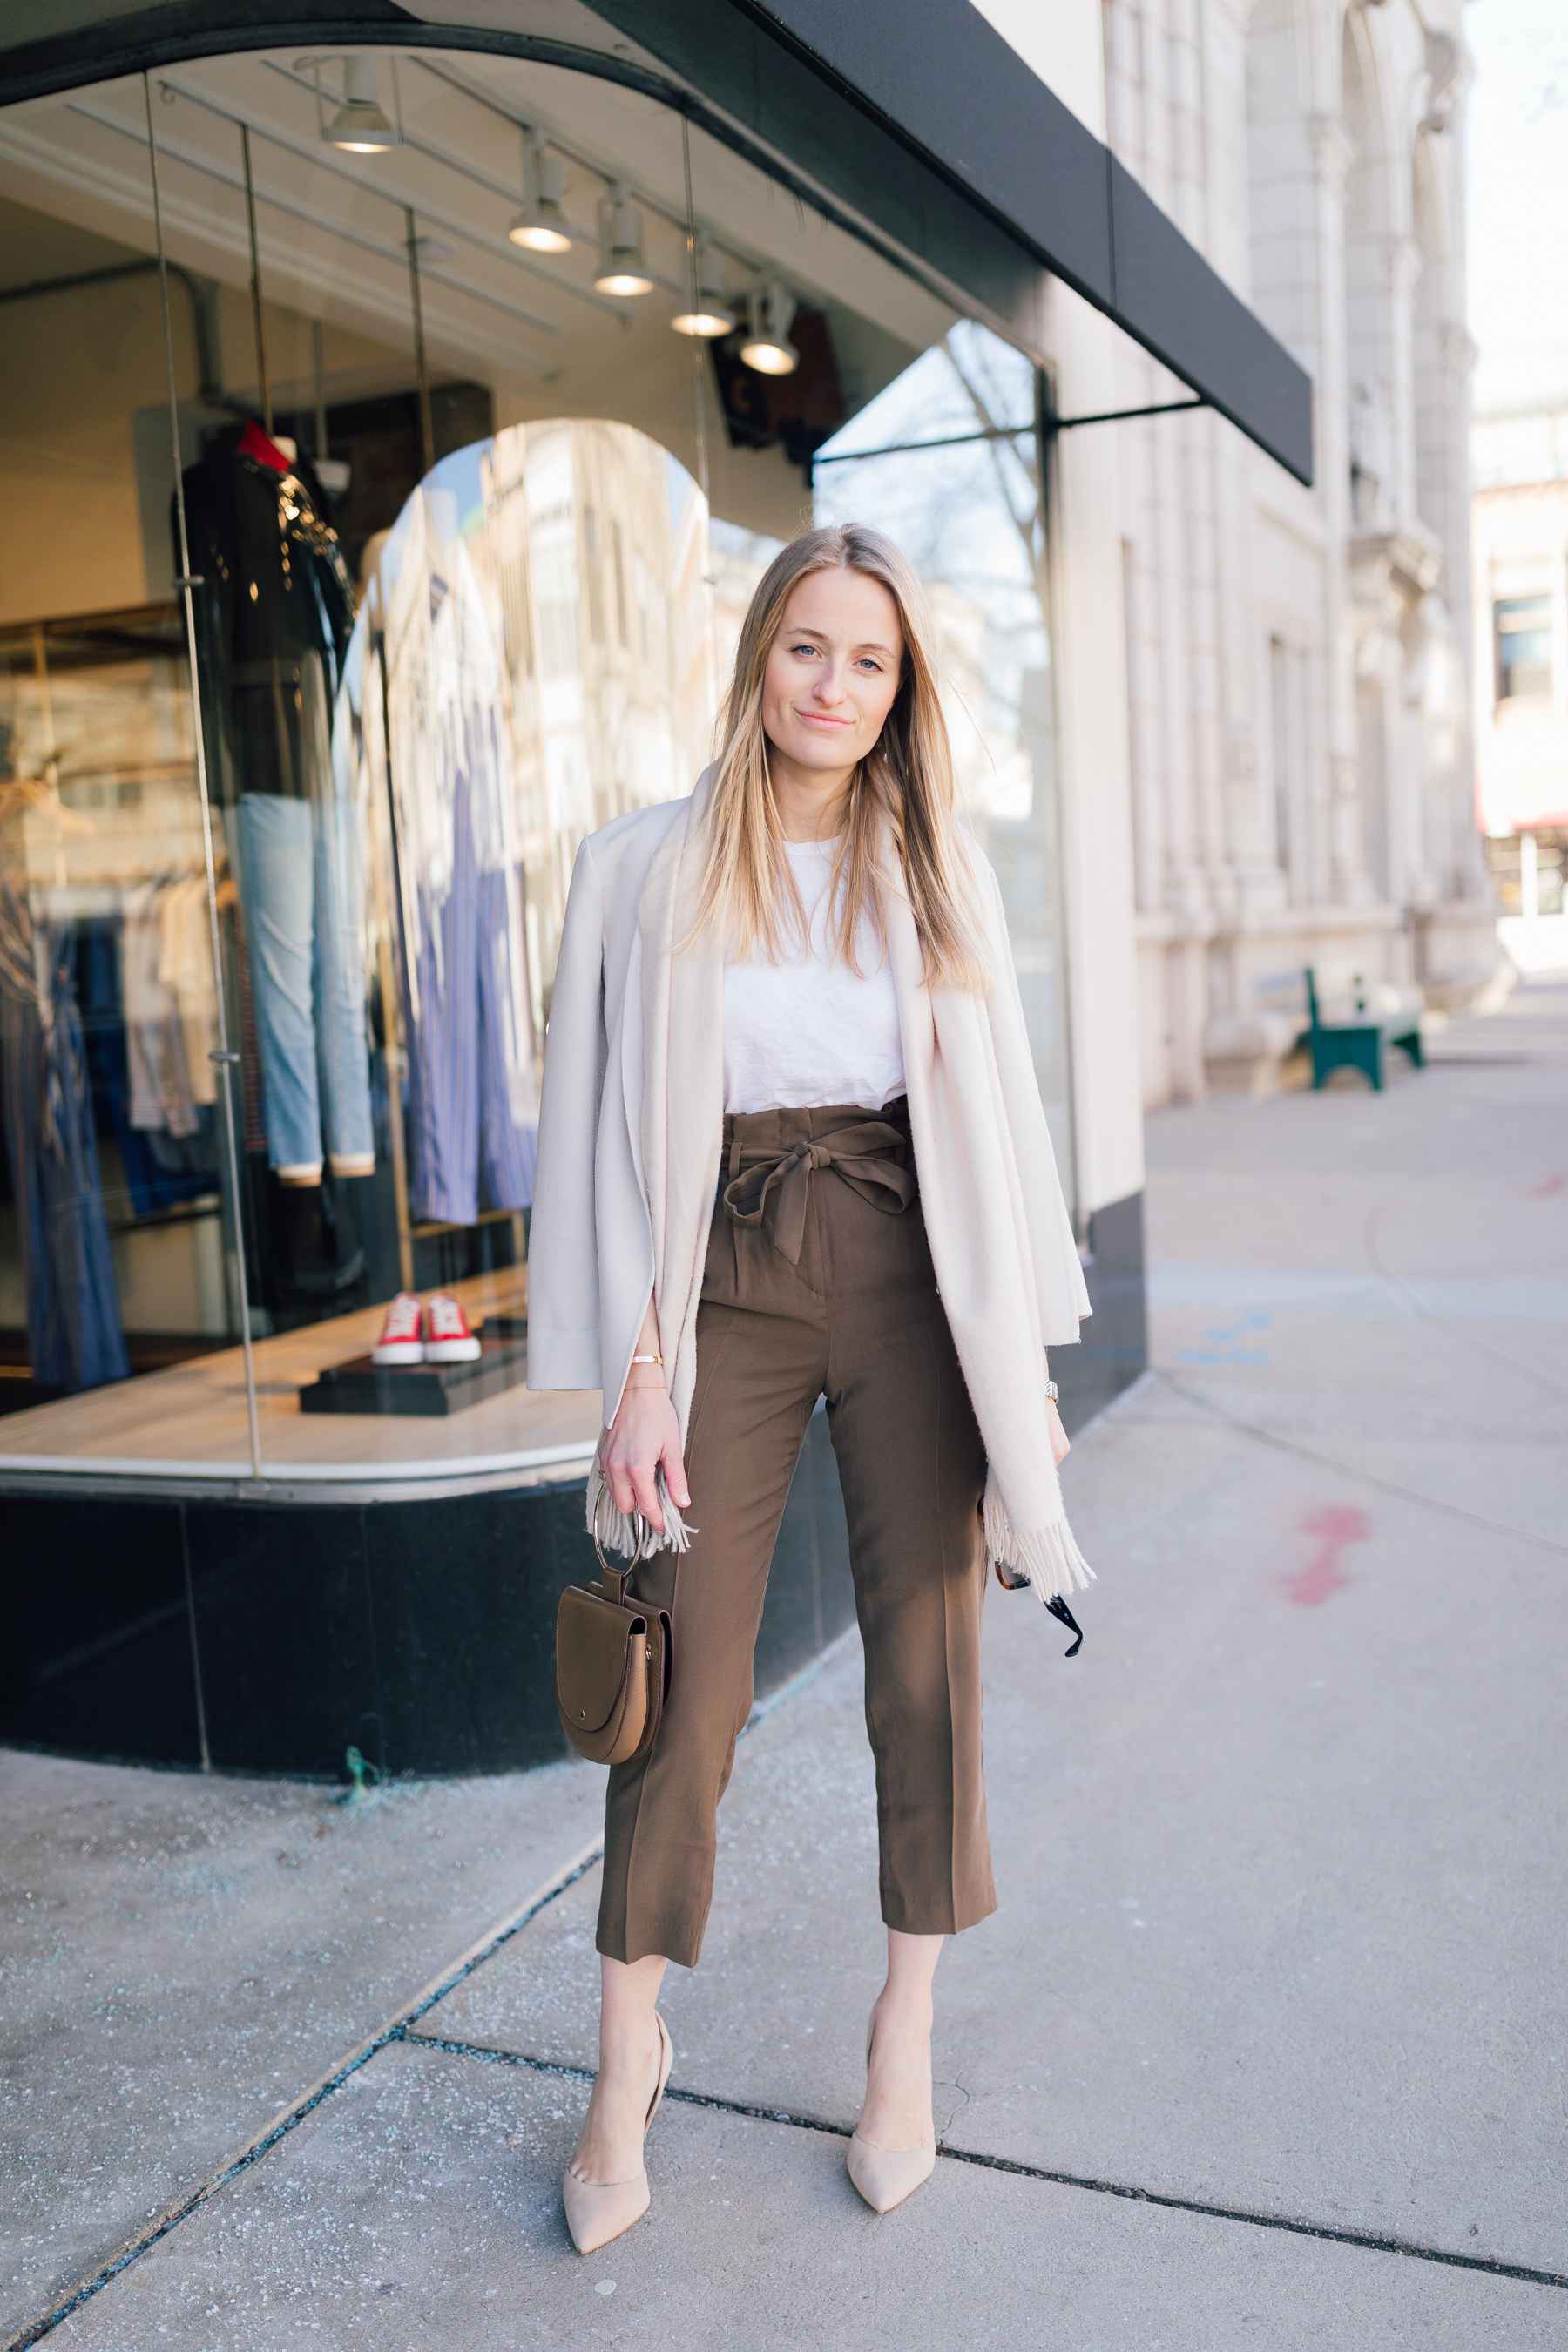 Cindy Trotta of Cindy Hattersley wearing a paper bag pant street style for work wear with a neutral blazer and scarf